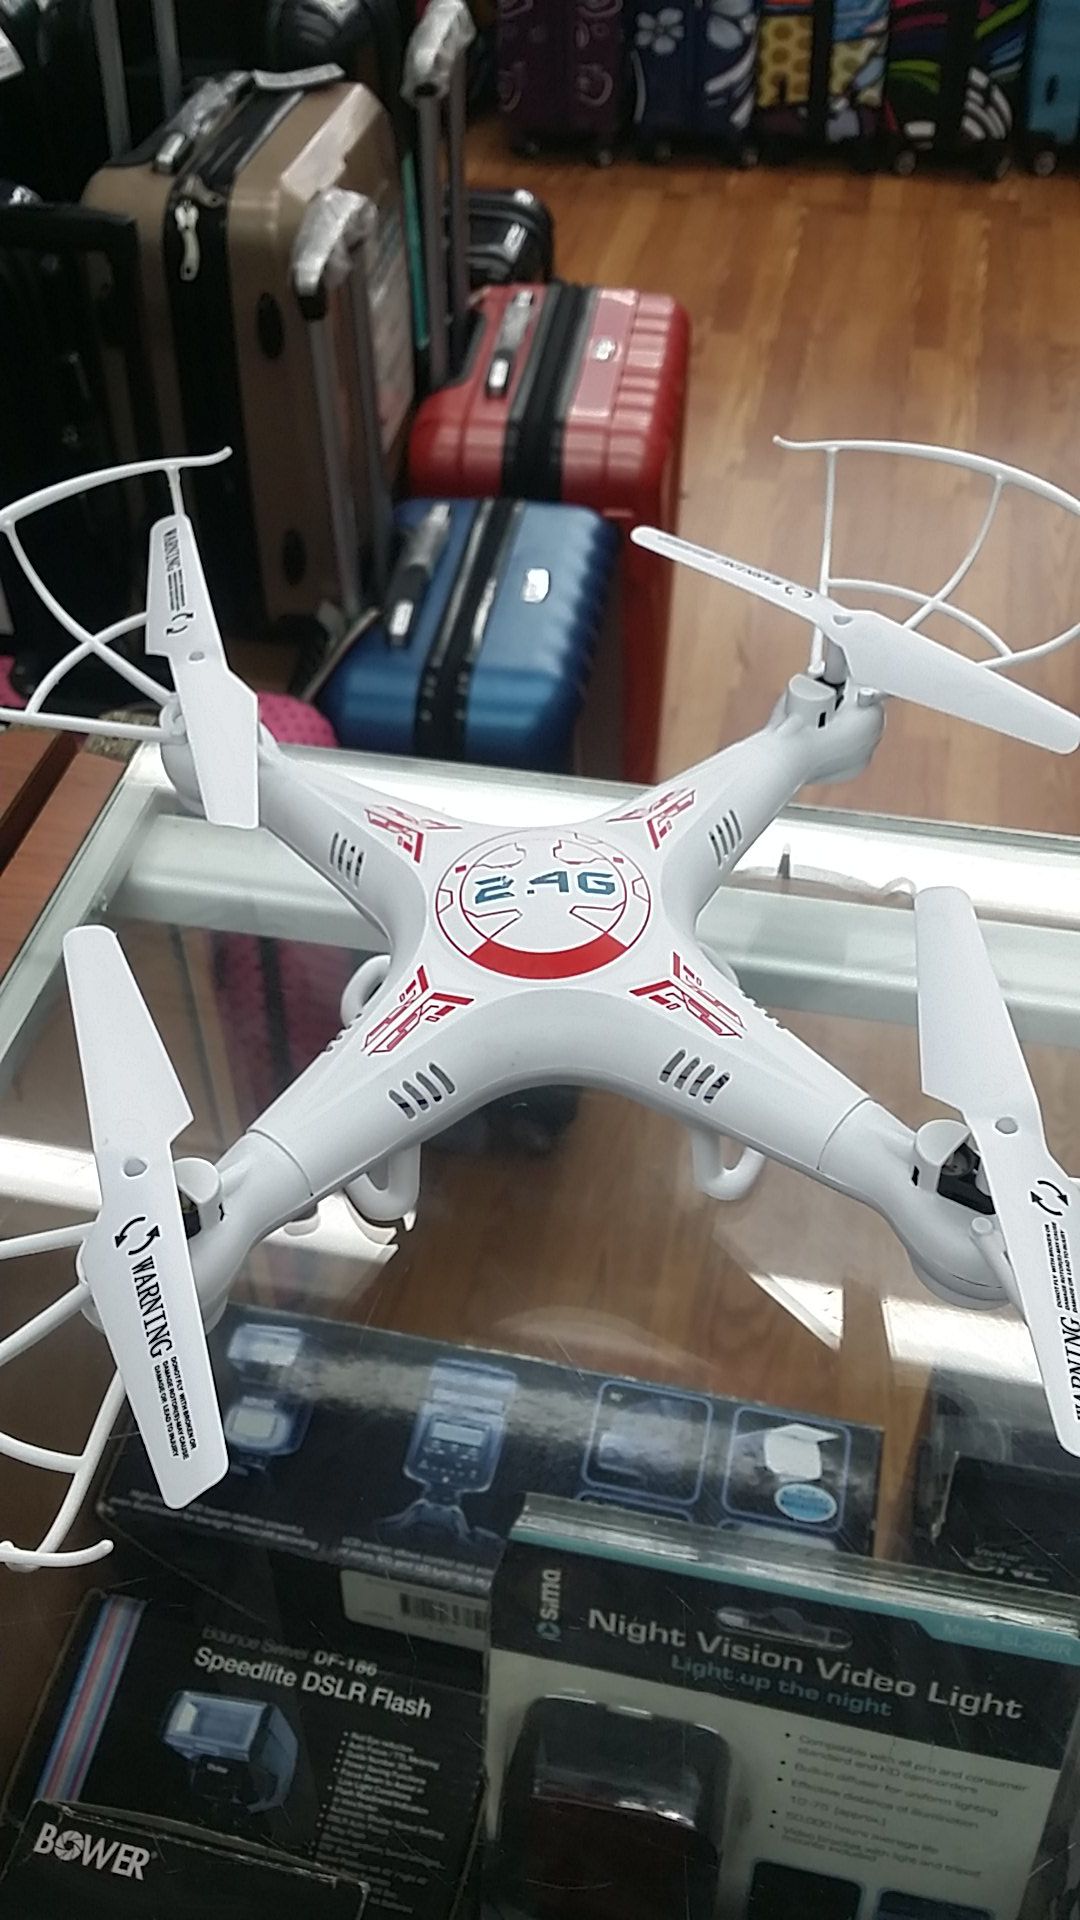 MINI DRONE 4 CHANNEL 2.4G REMOTE CONTROL QUADCOPTER WITH 360° FOR SALE!!!